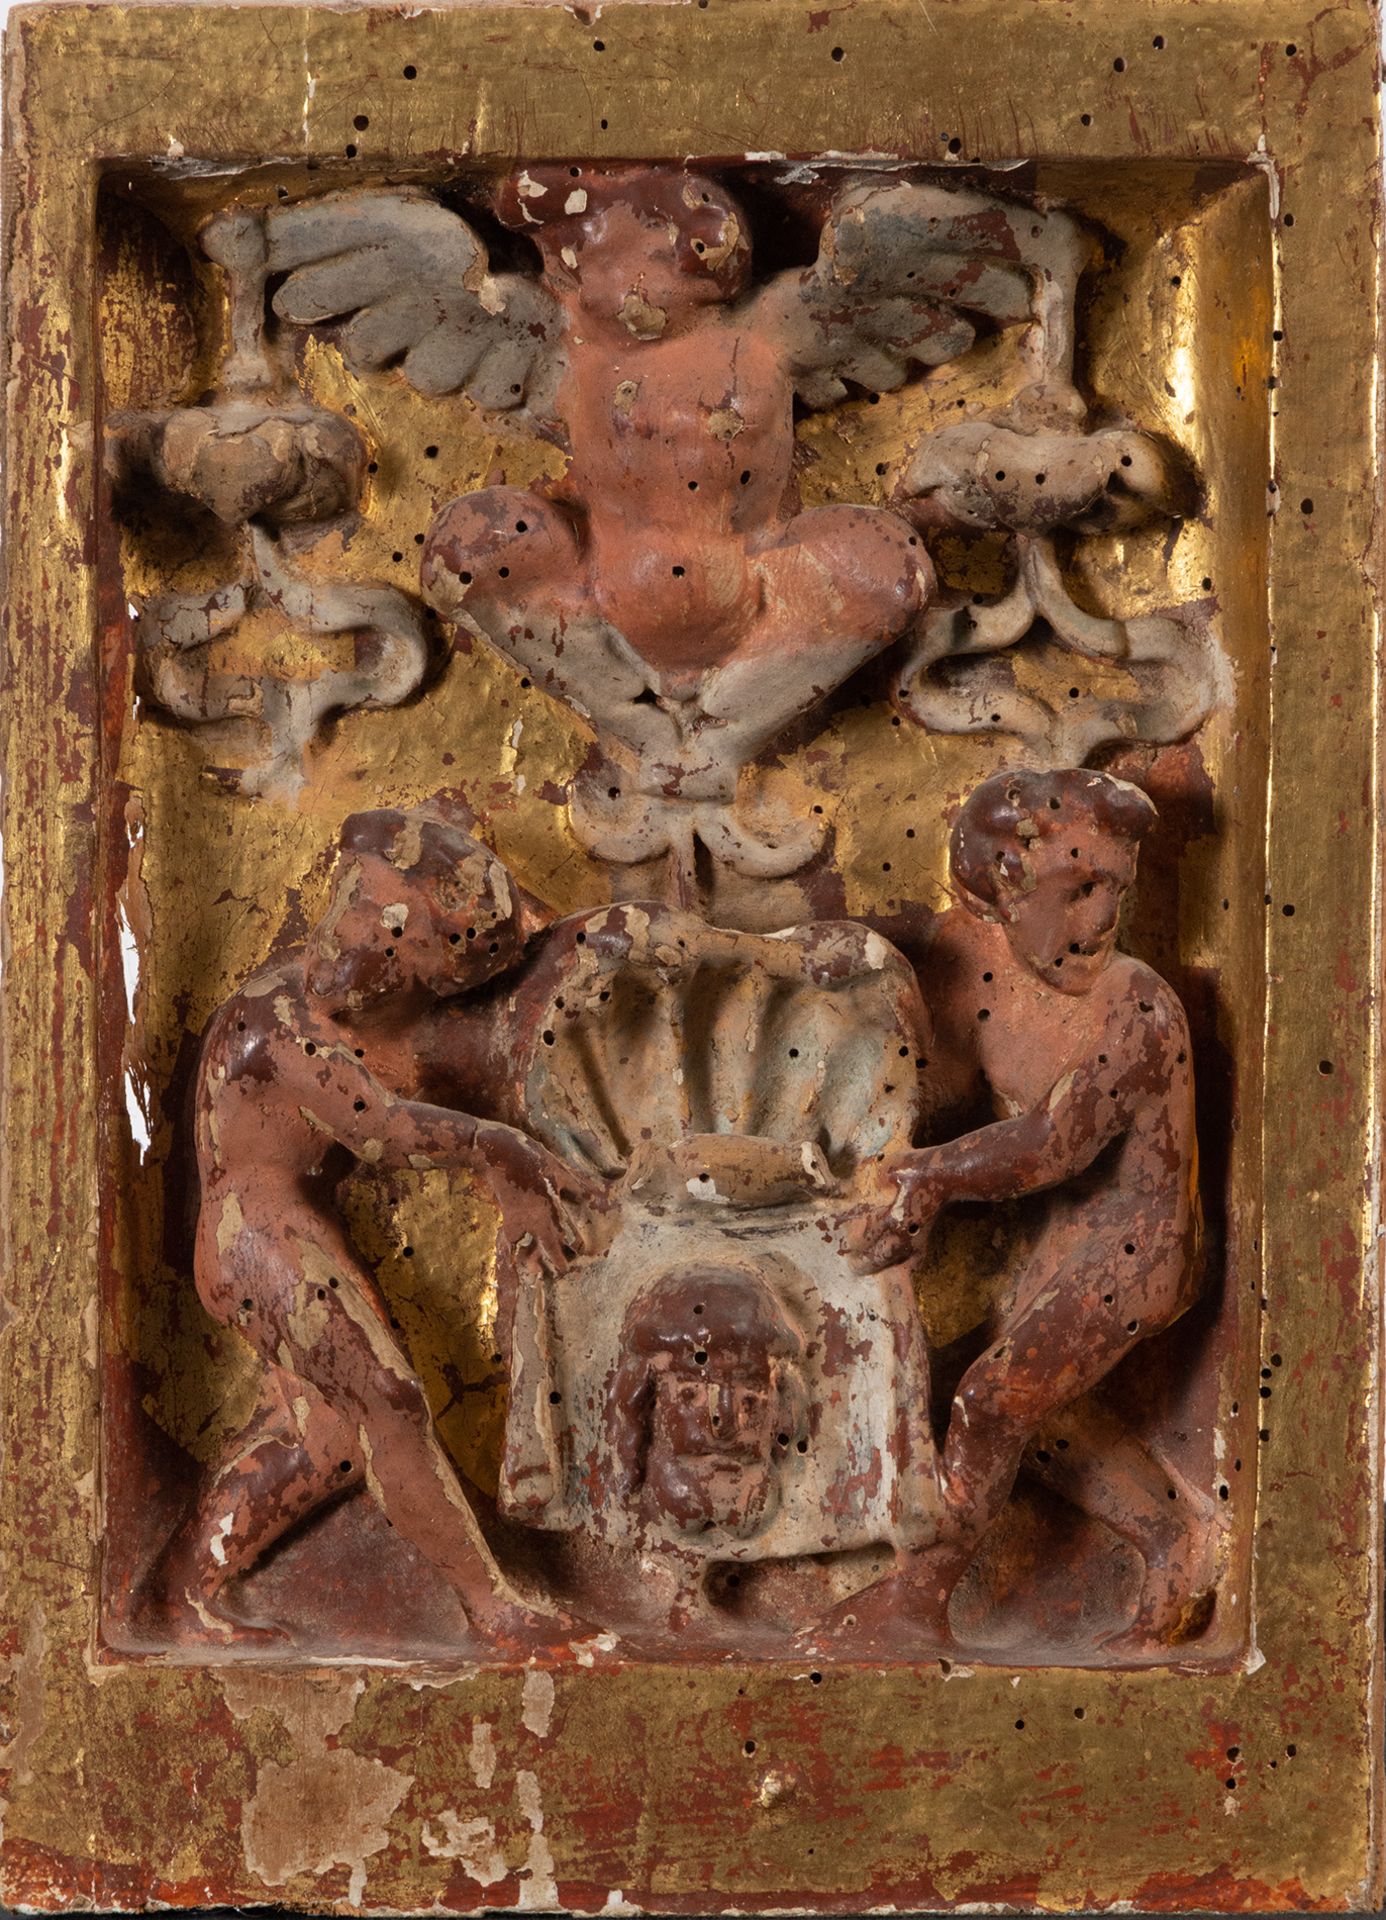 Pair of Plateresque Altar Frontals depicting Souls in Purgatory, 16th century - Image 5 of 6